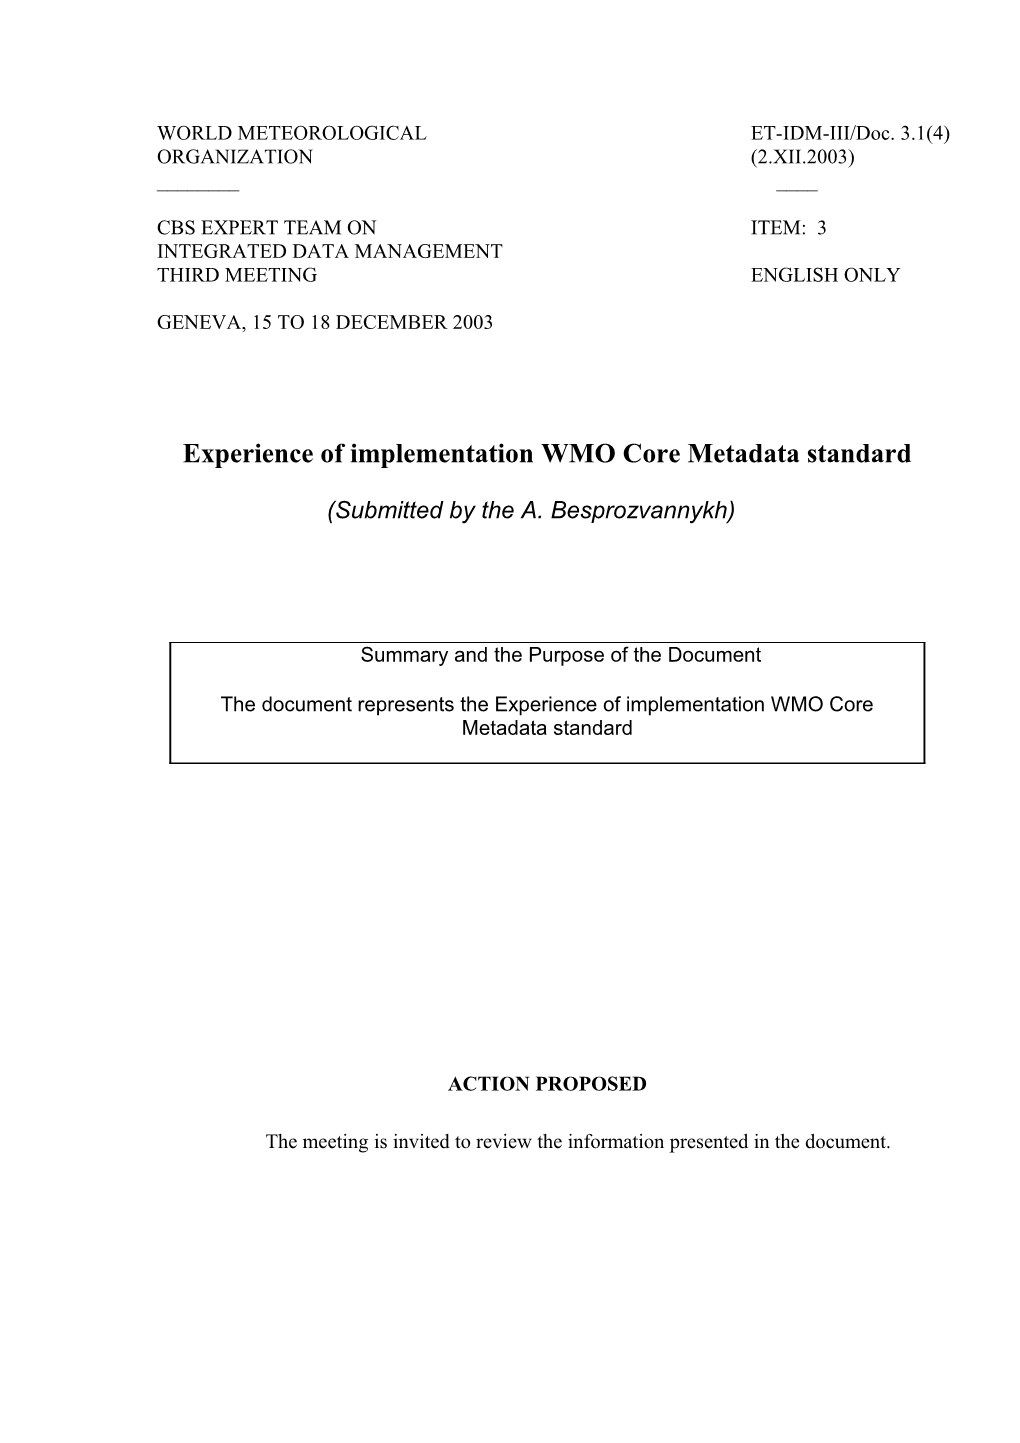 Experience of Implementation WMO Core Metadata Standard